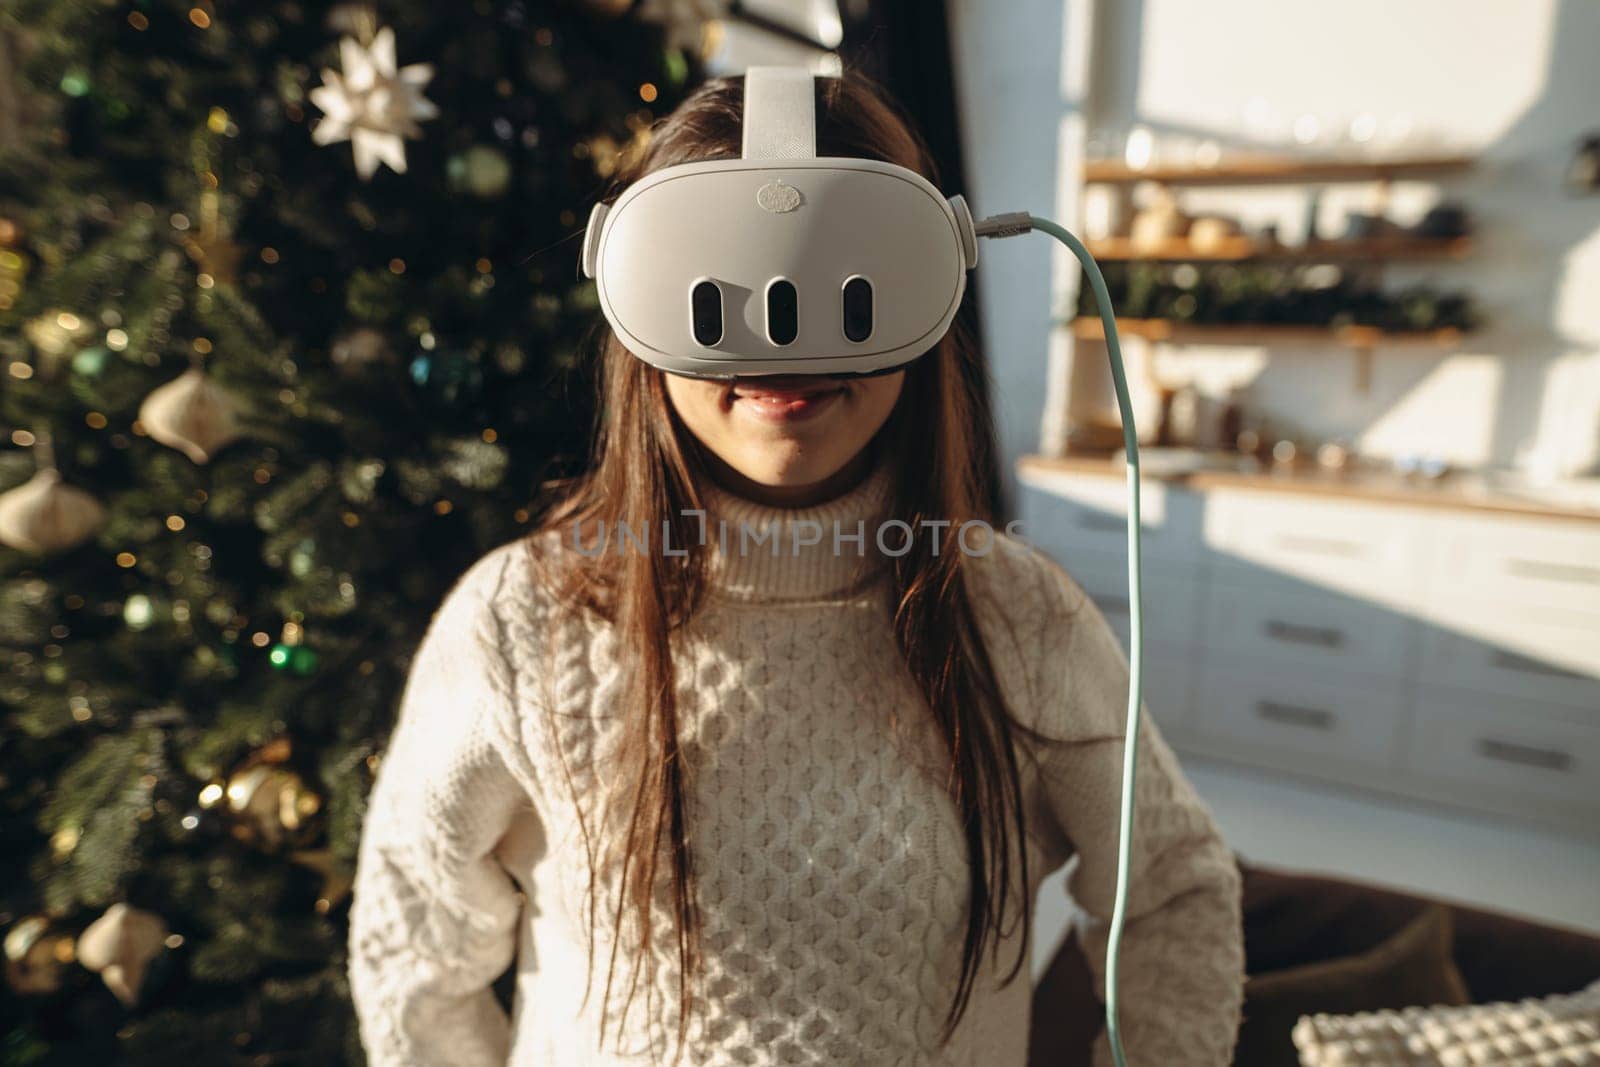 Surrounded by sunshine on a winter morning, a lively young woman wears a VR headset. High quality photo